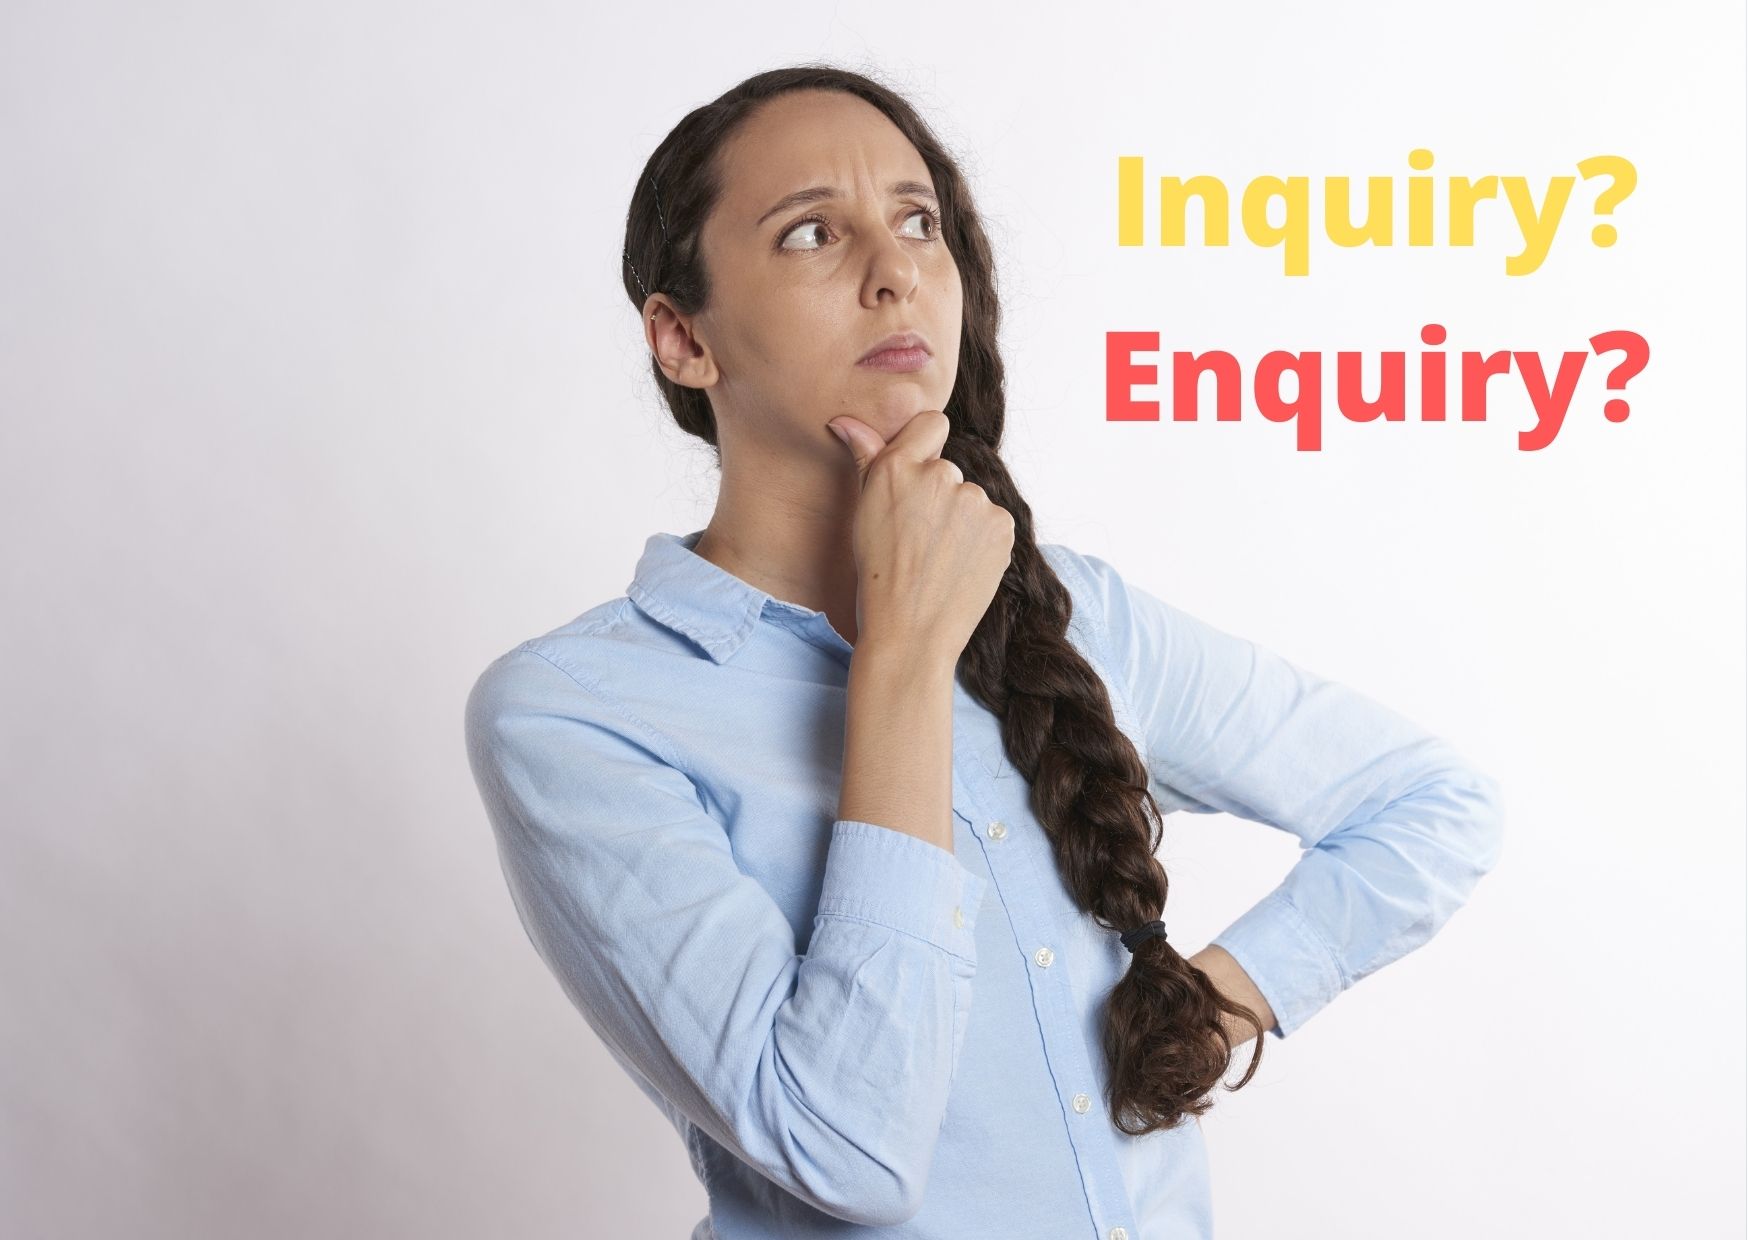 Girl Pondering Inquiry vs. Engquiry